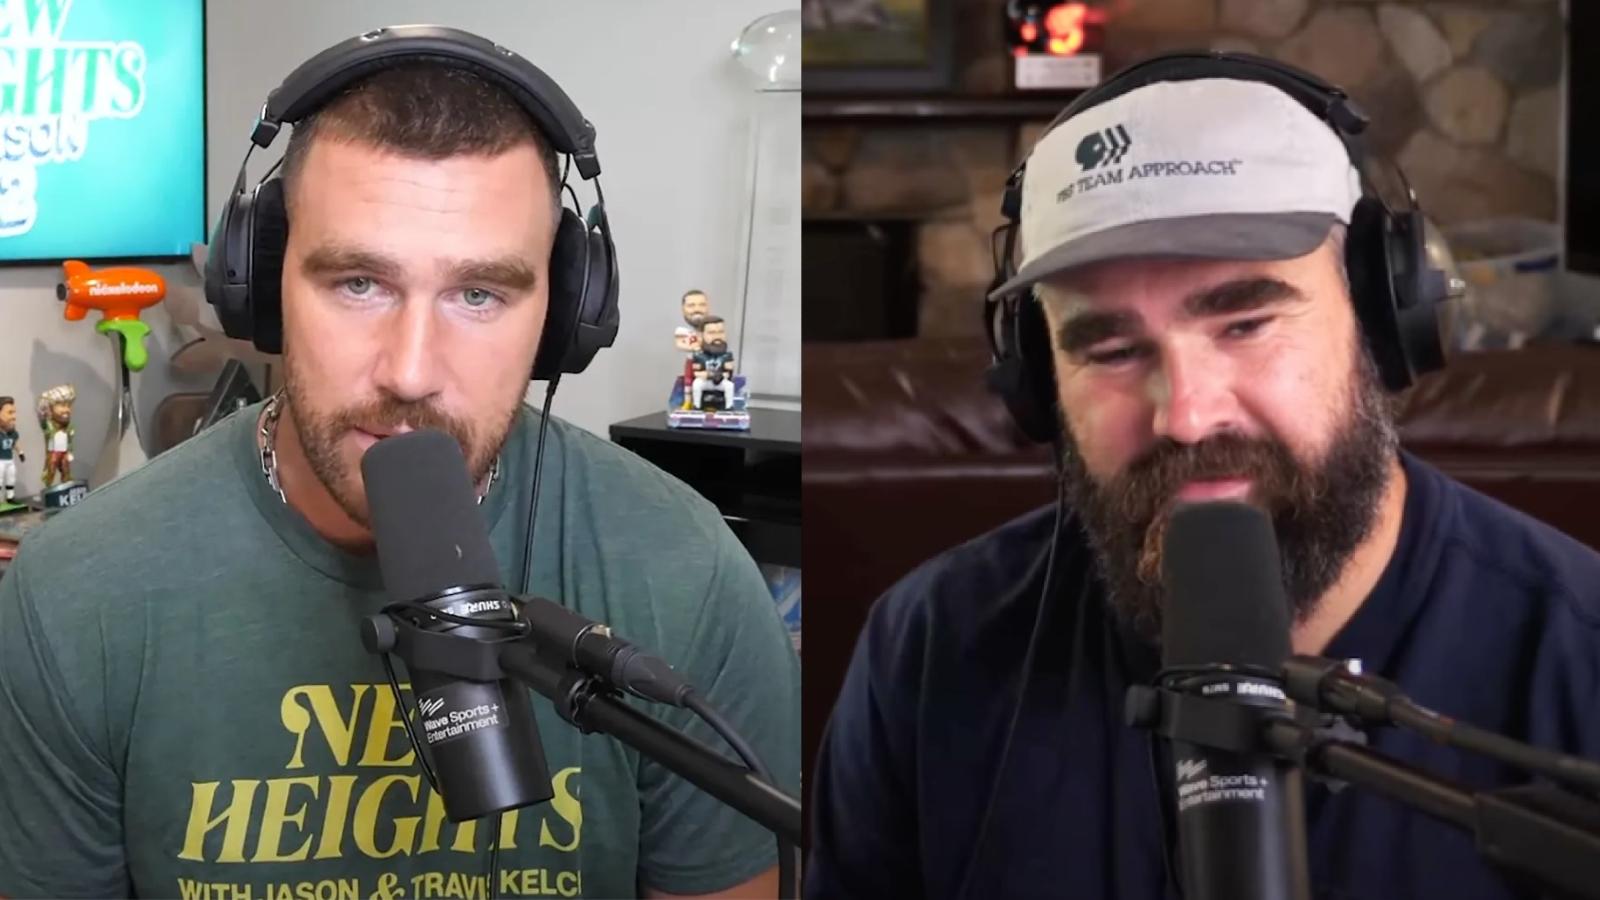 Jason and Travis Kelce on New Heights podcast